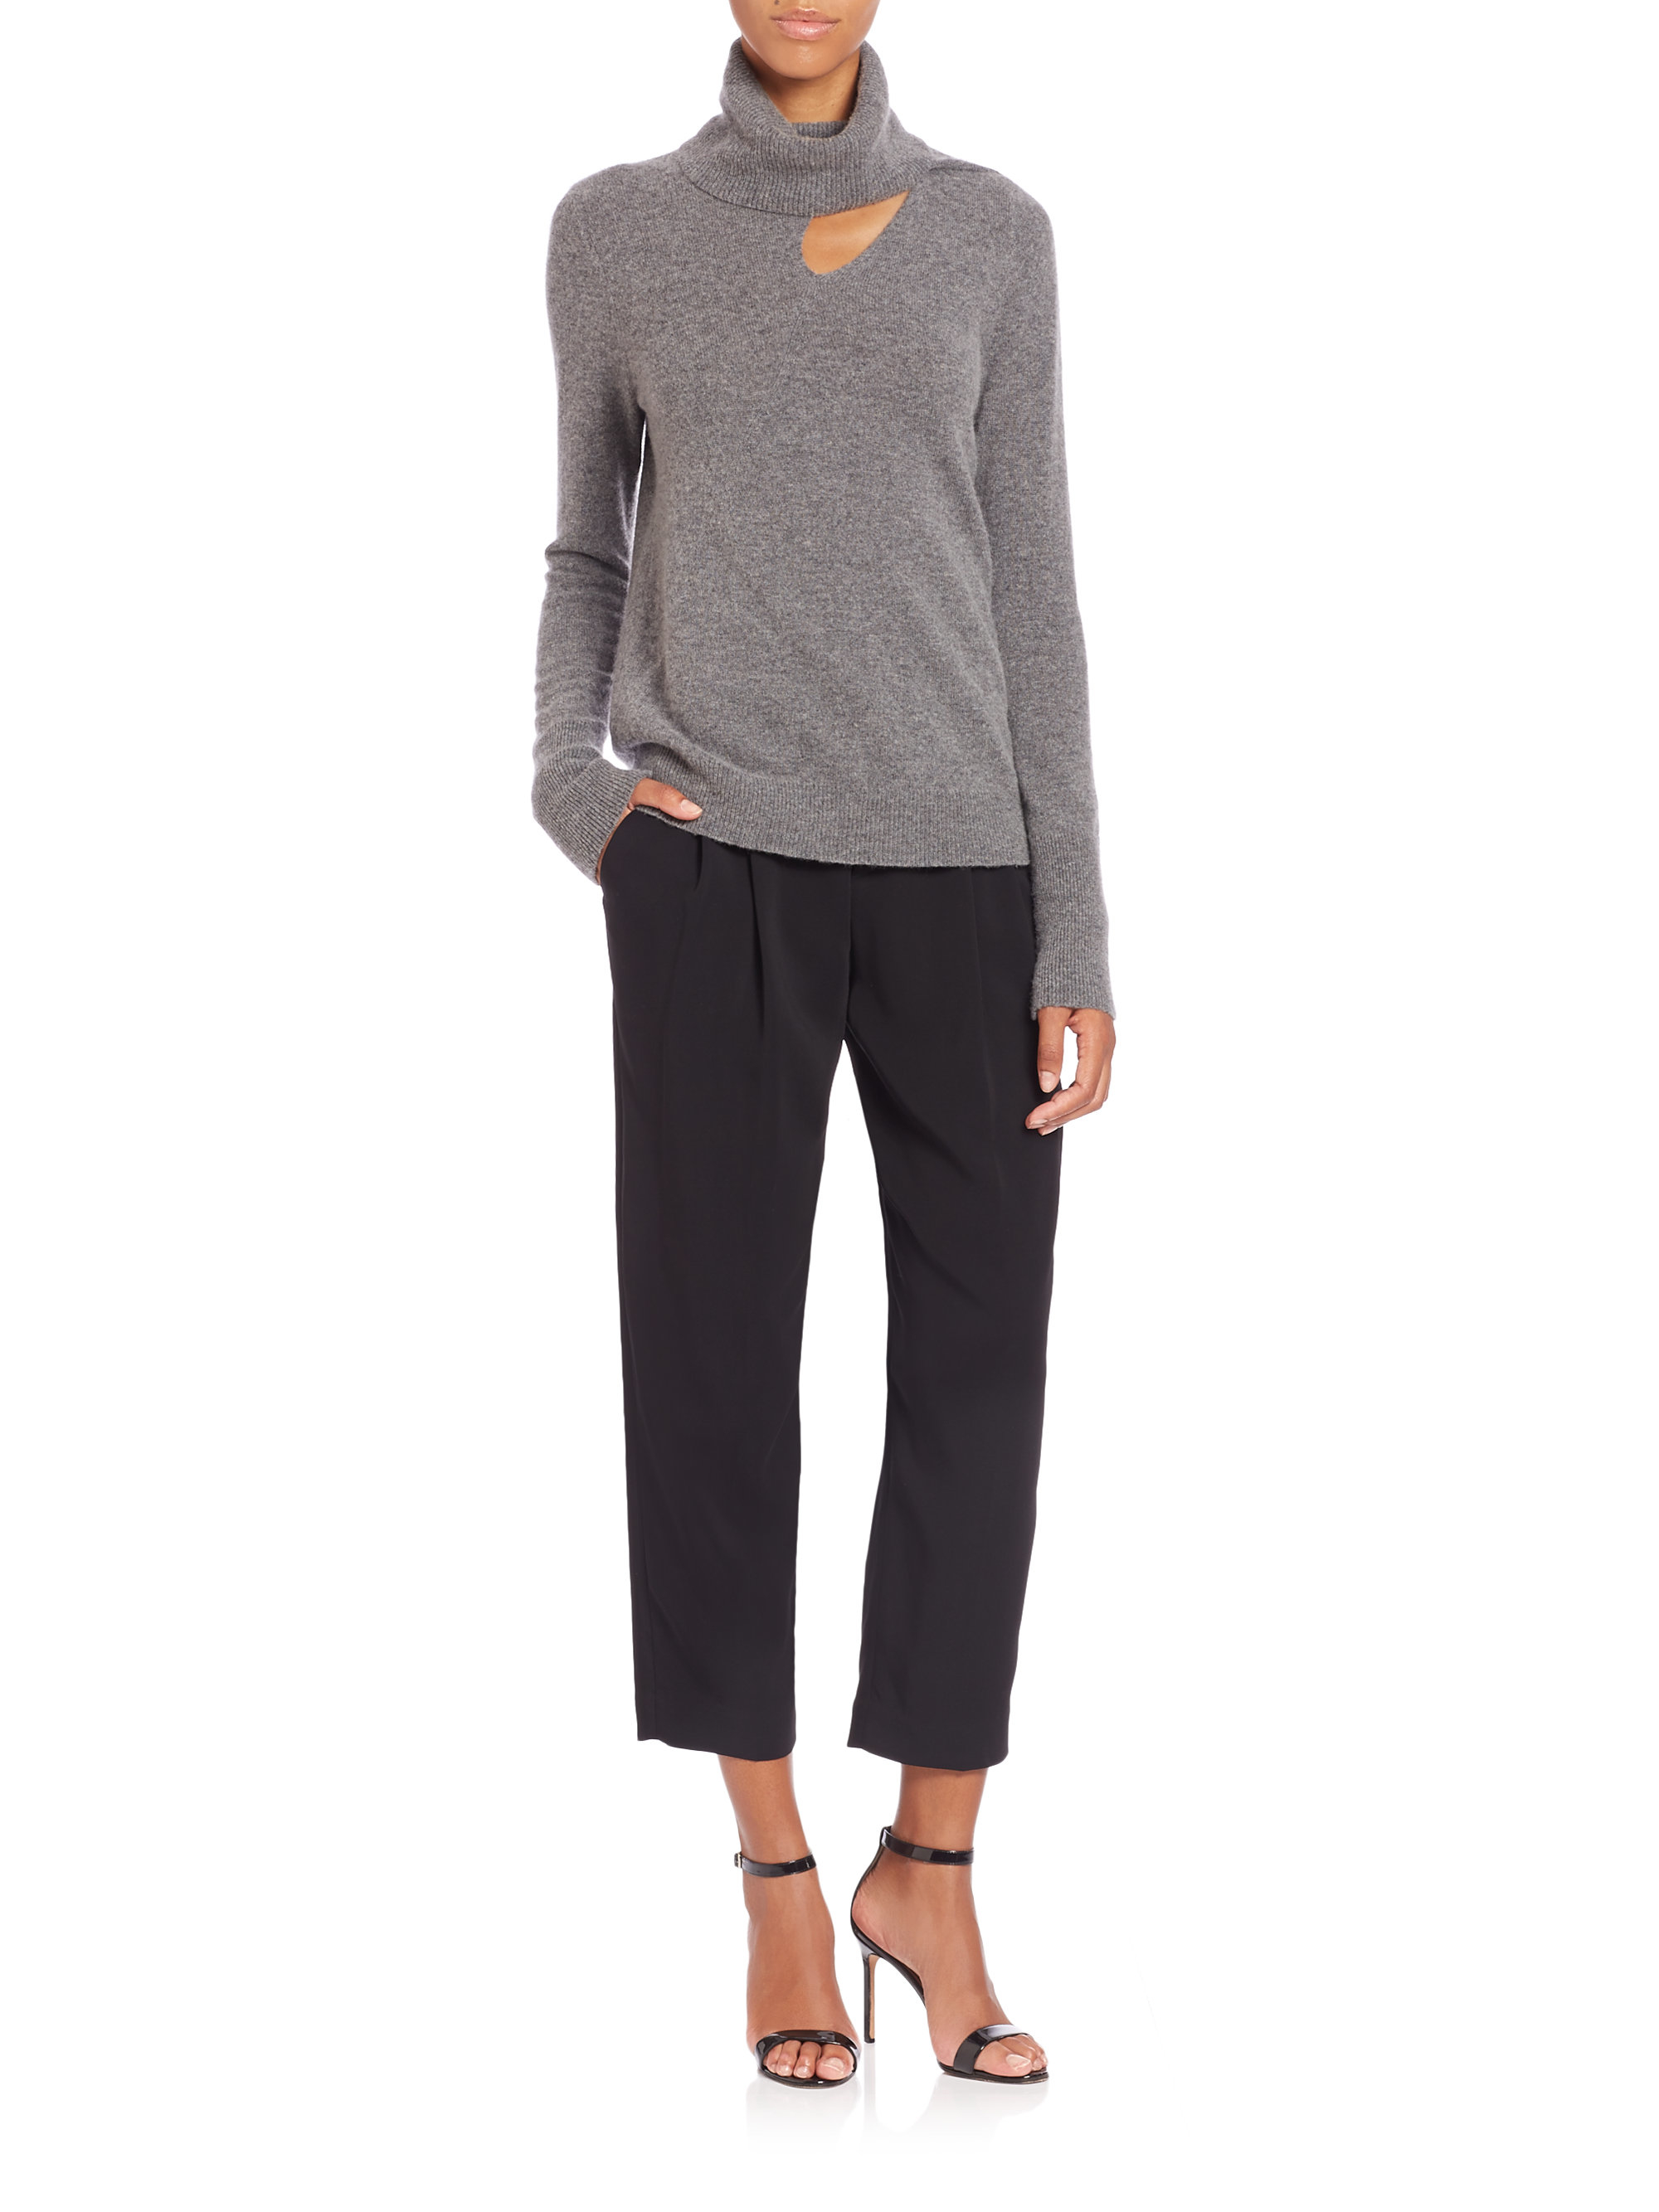 Lyst - A.L.C. Billy Cutout Turtleneck Sweater in Gray